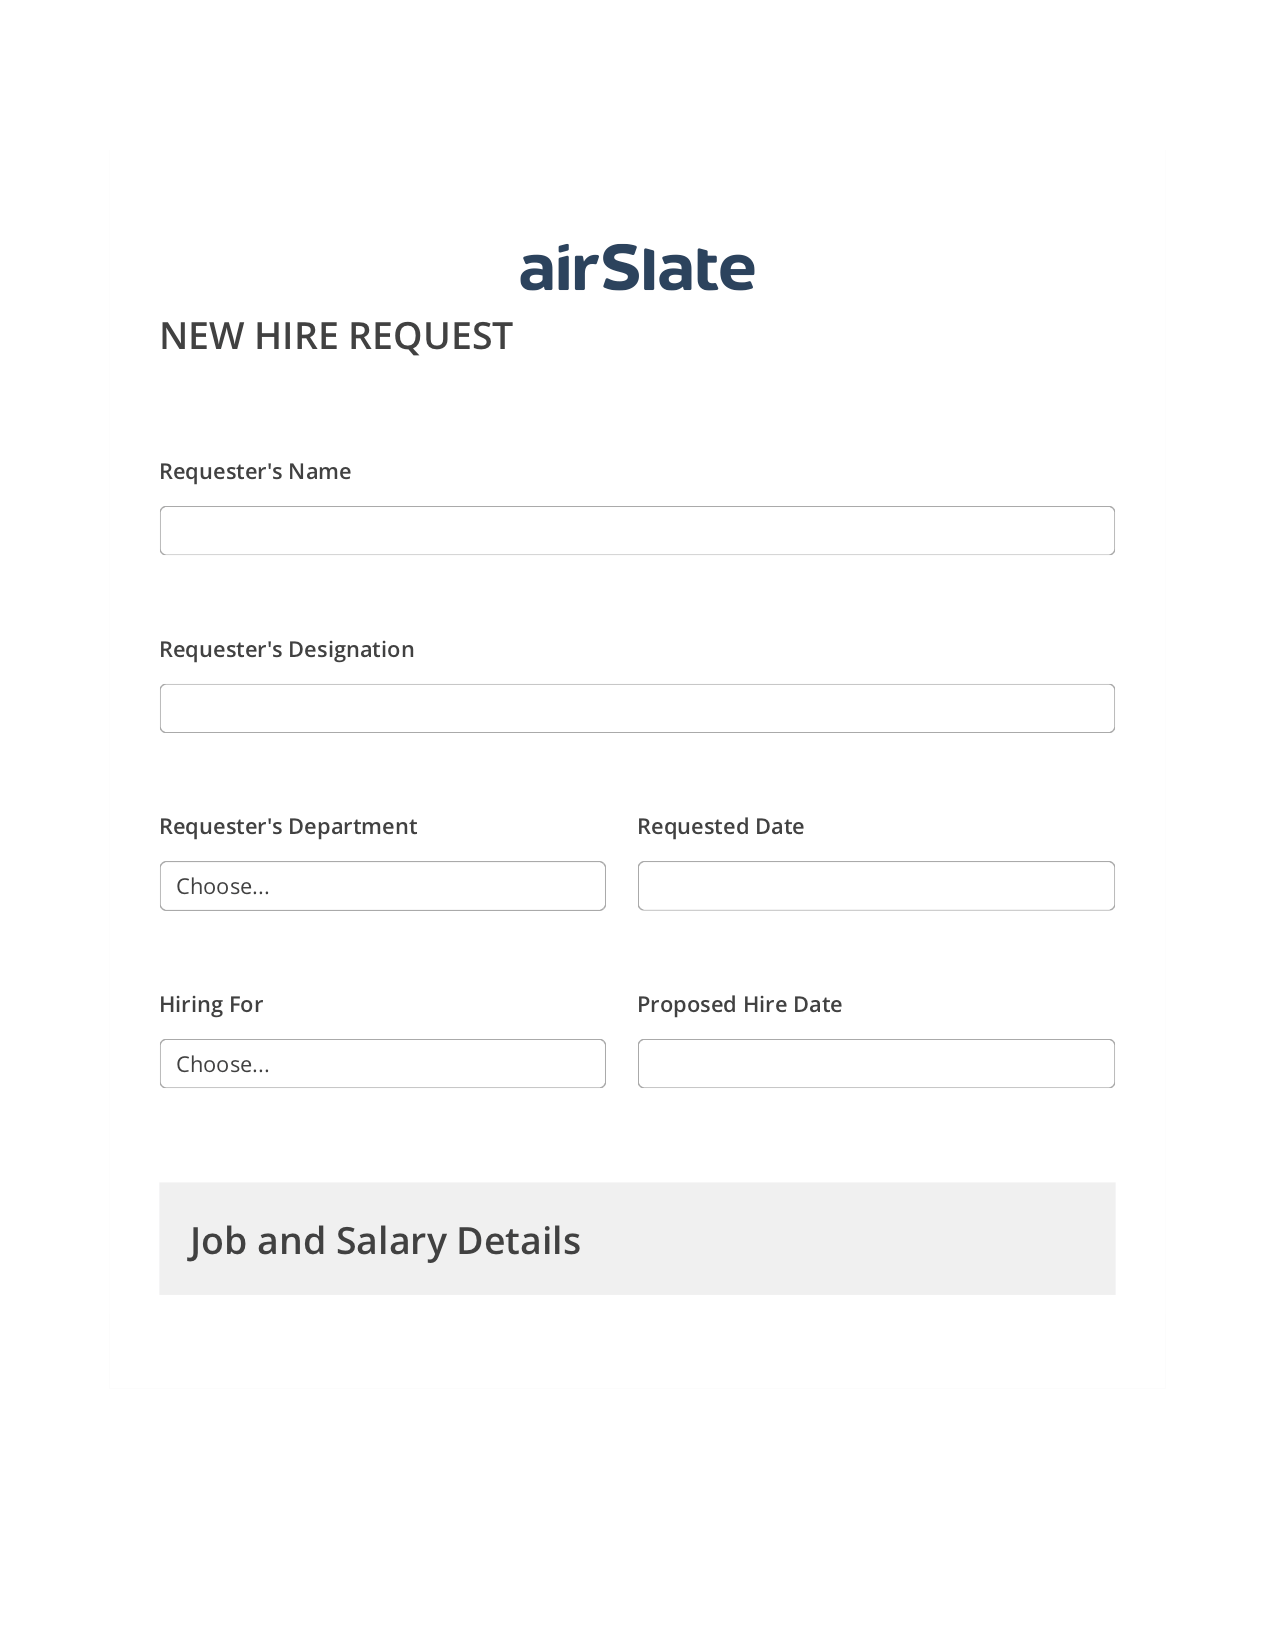 Hiring Request Workflow Pre-fill from another Slate Bot, Lock the Slate Bot, Export to WebMerge Bot